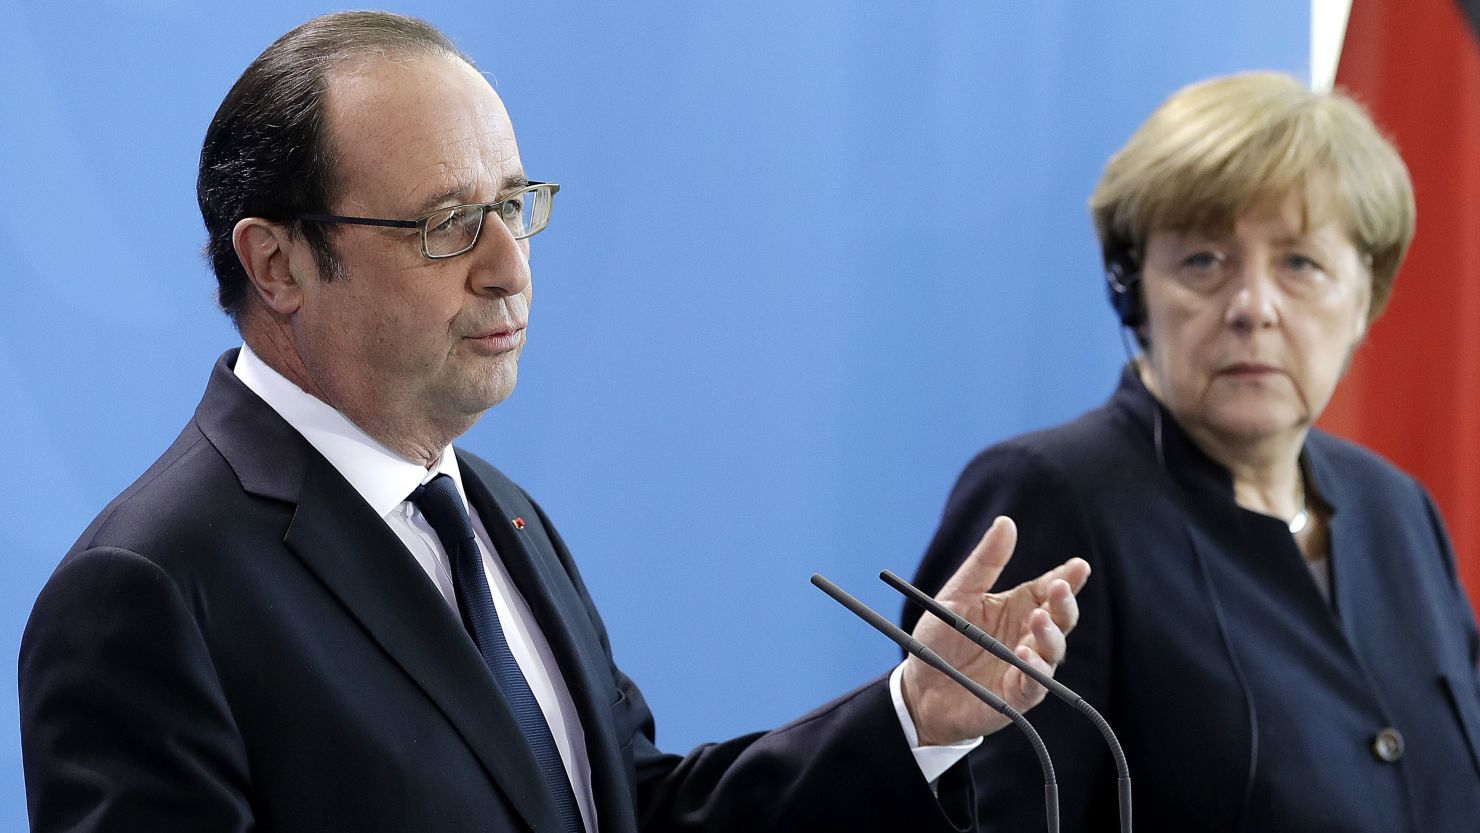 French President François Hollande and German Chancellor Angela Merkel face reporters Friday in Berlin.